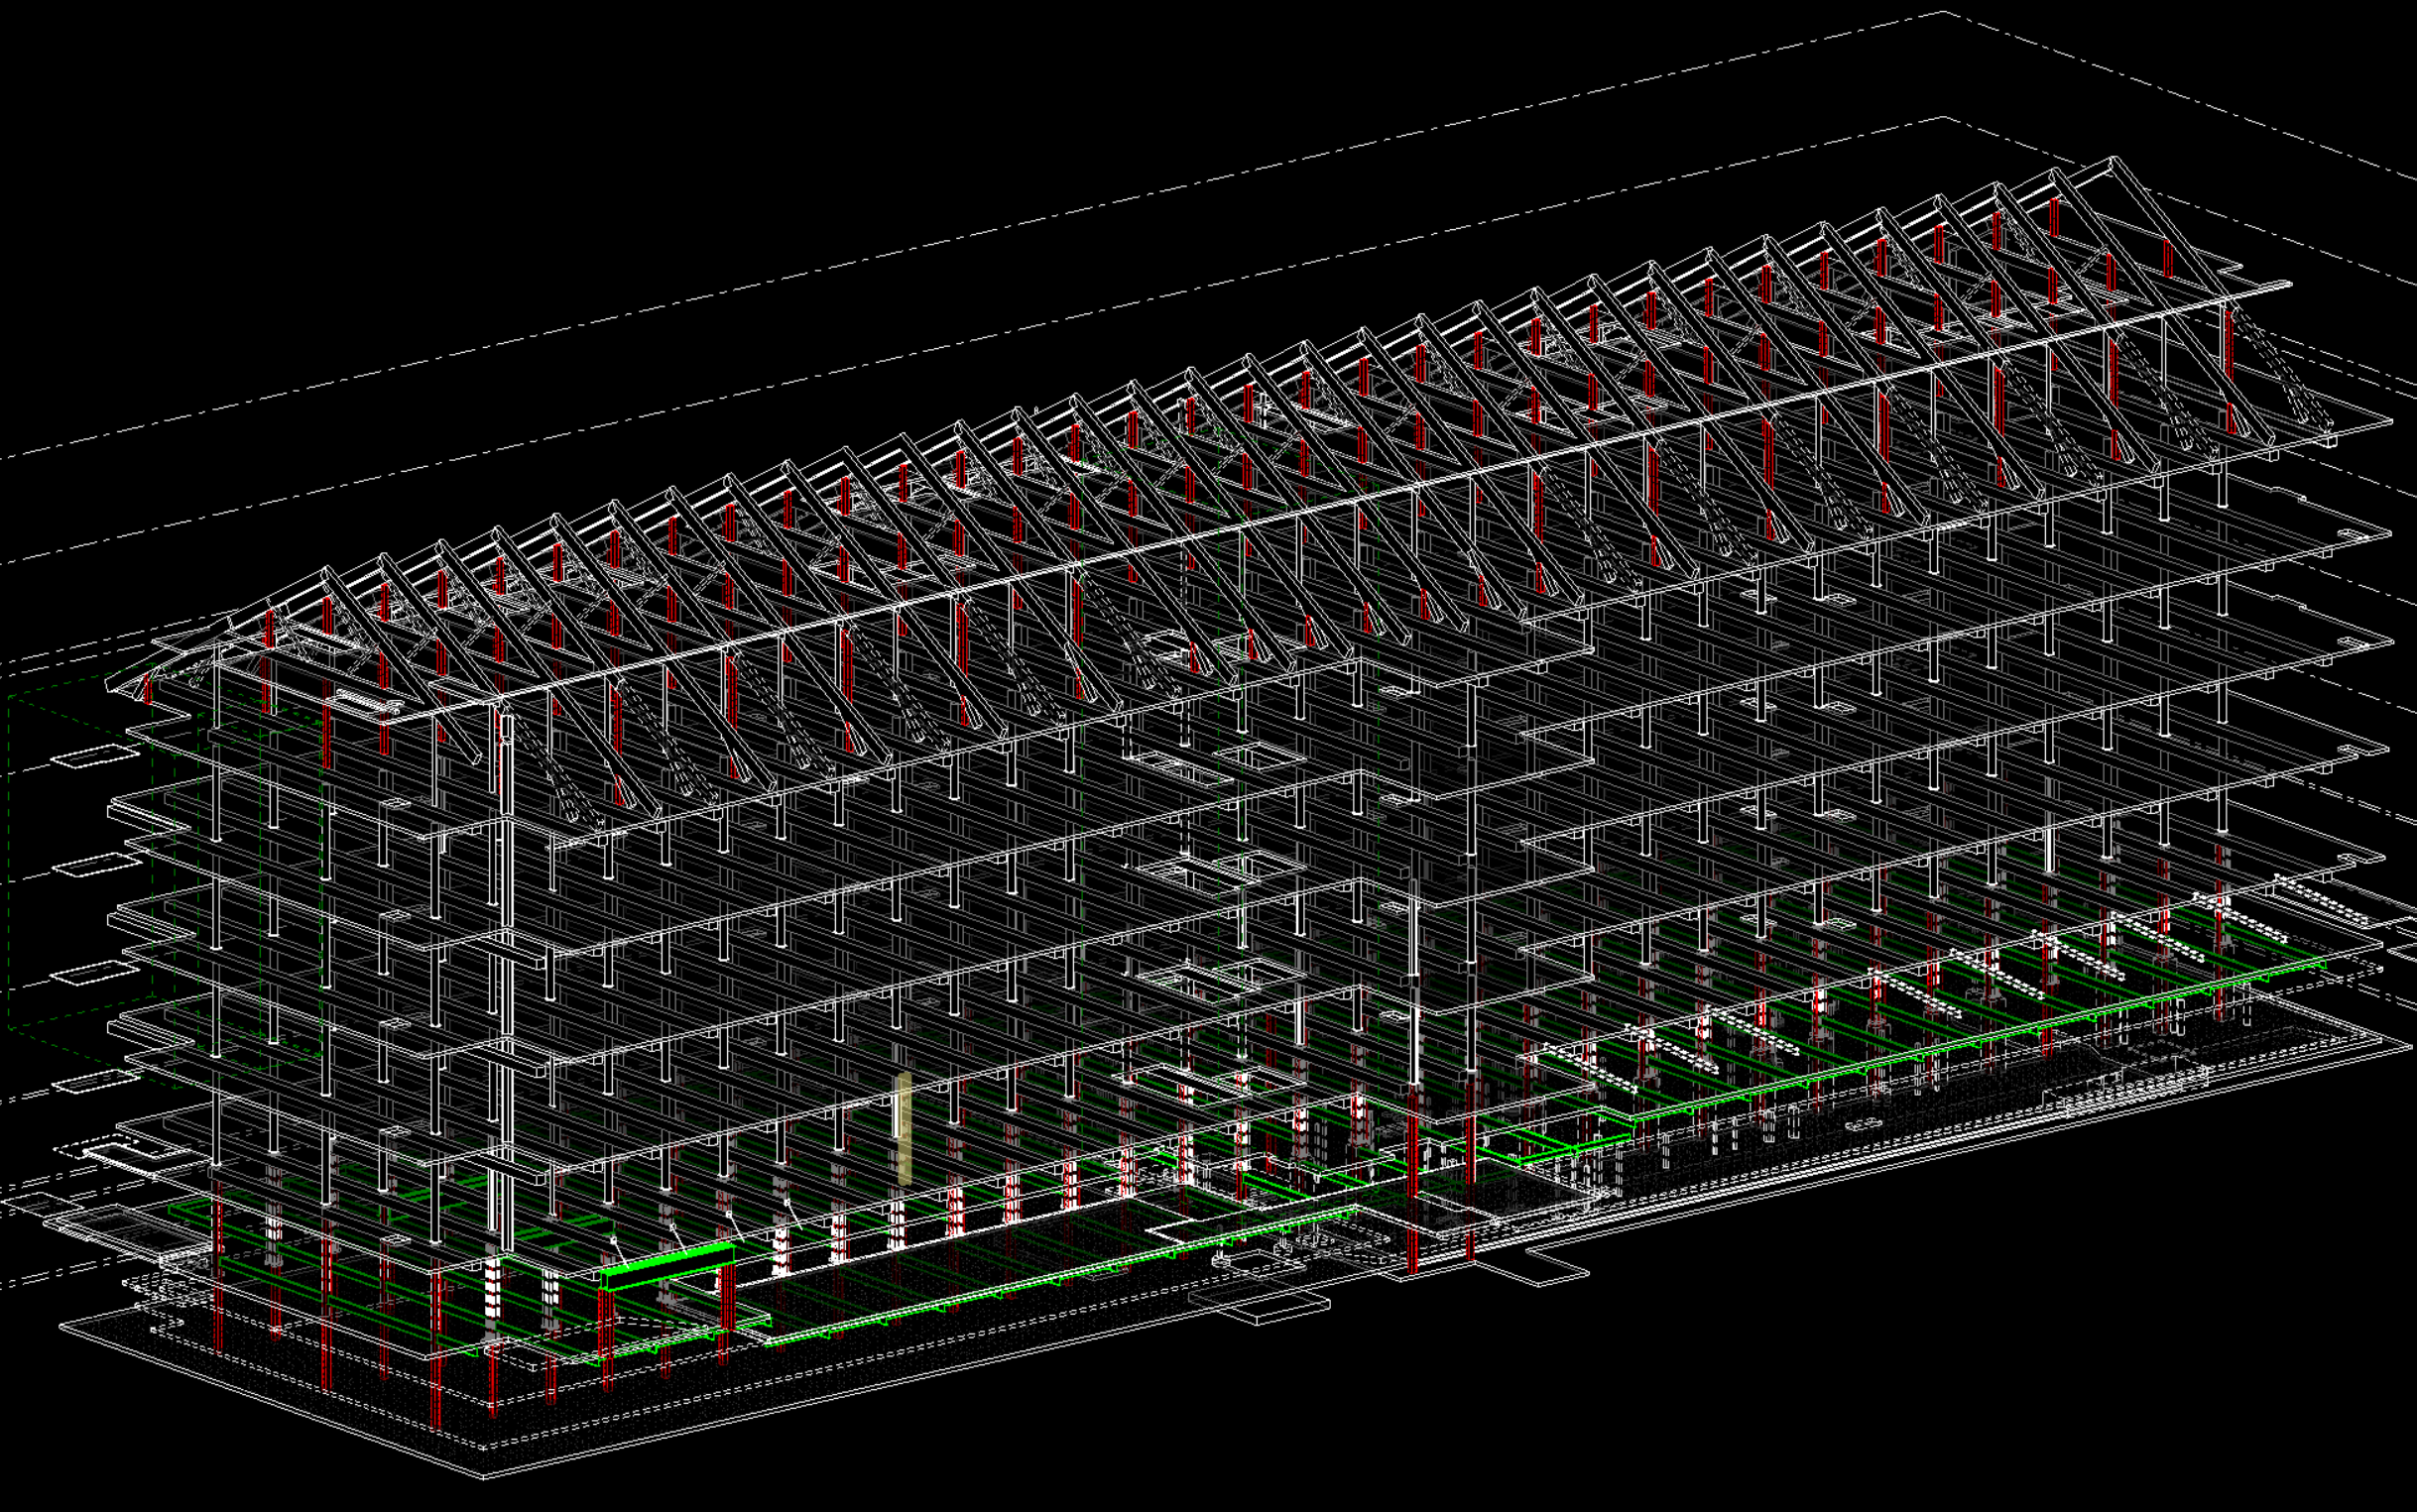 3d structural model showing new elements in red and green